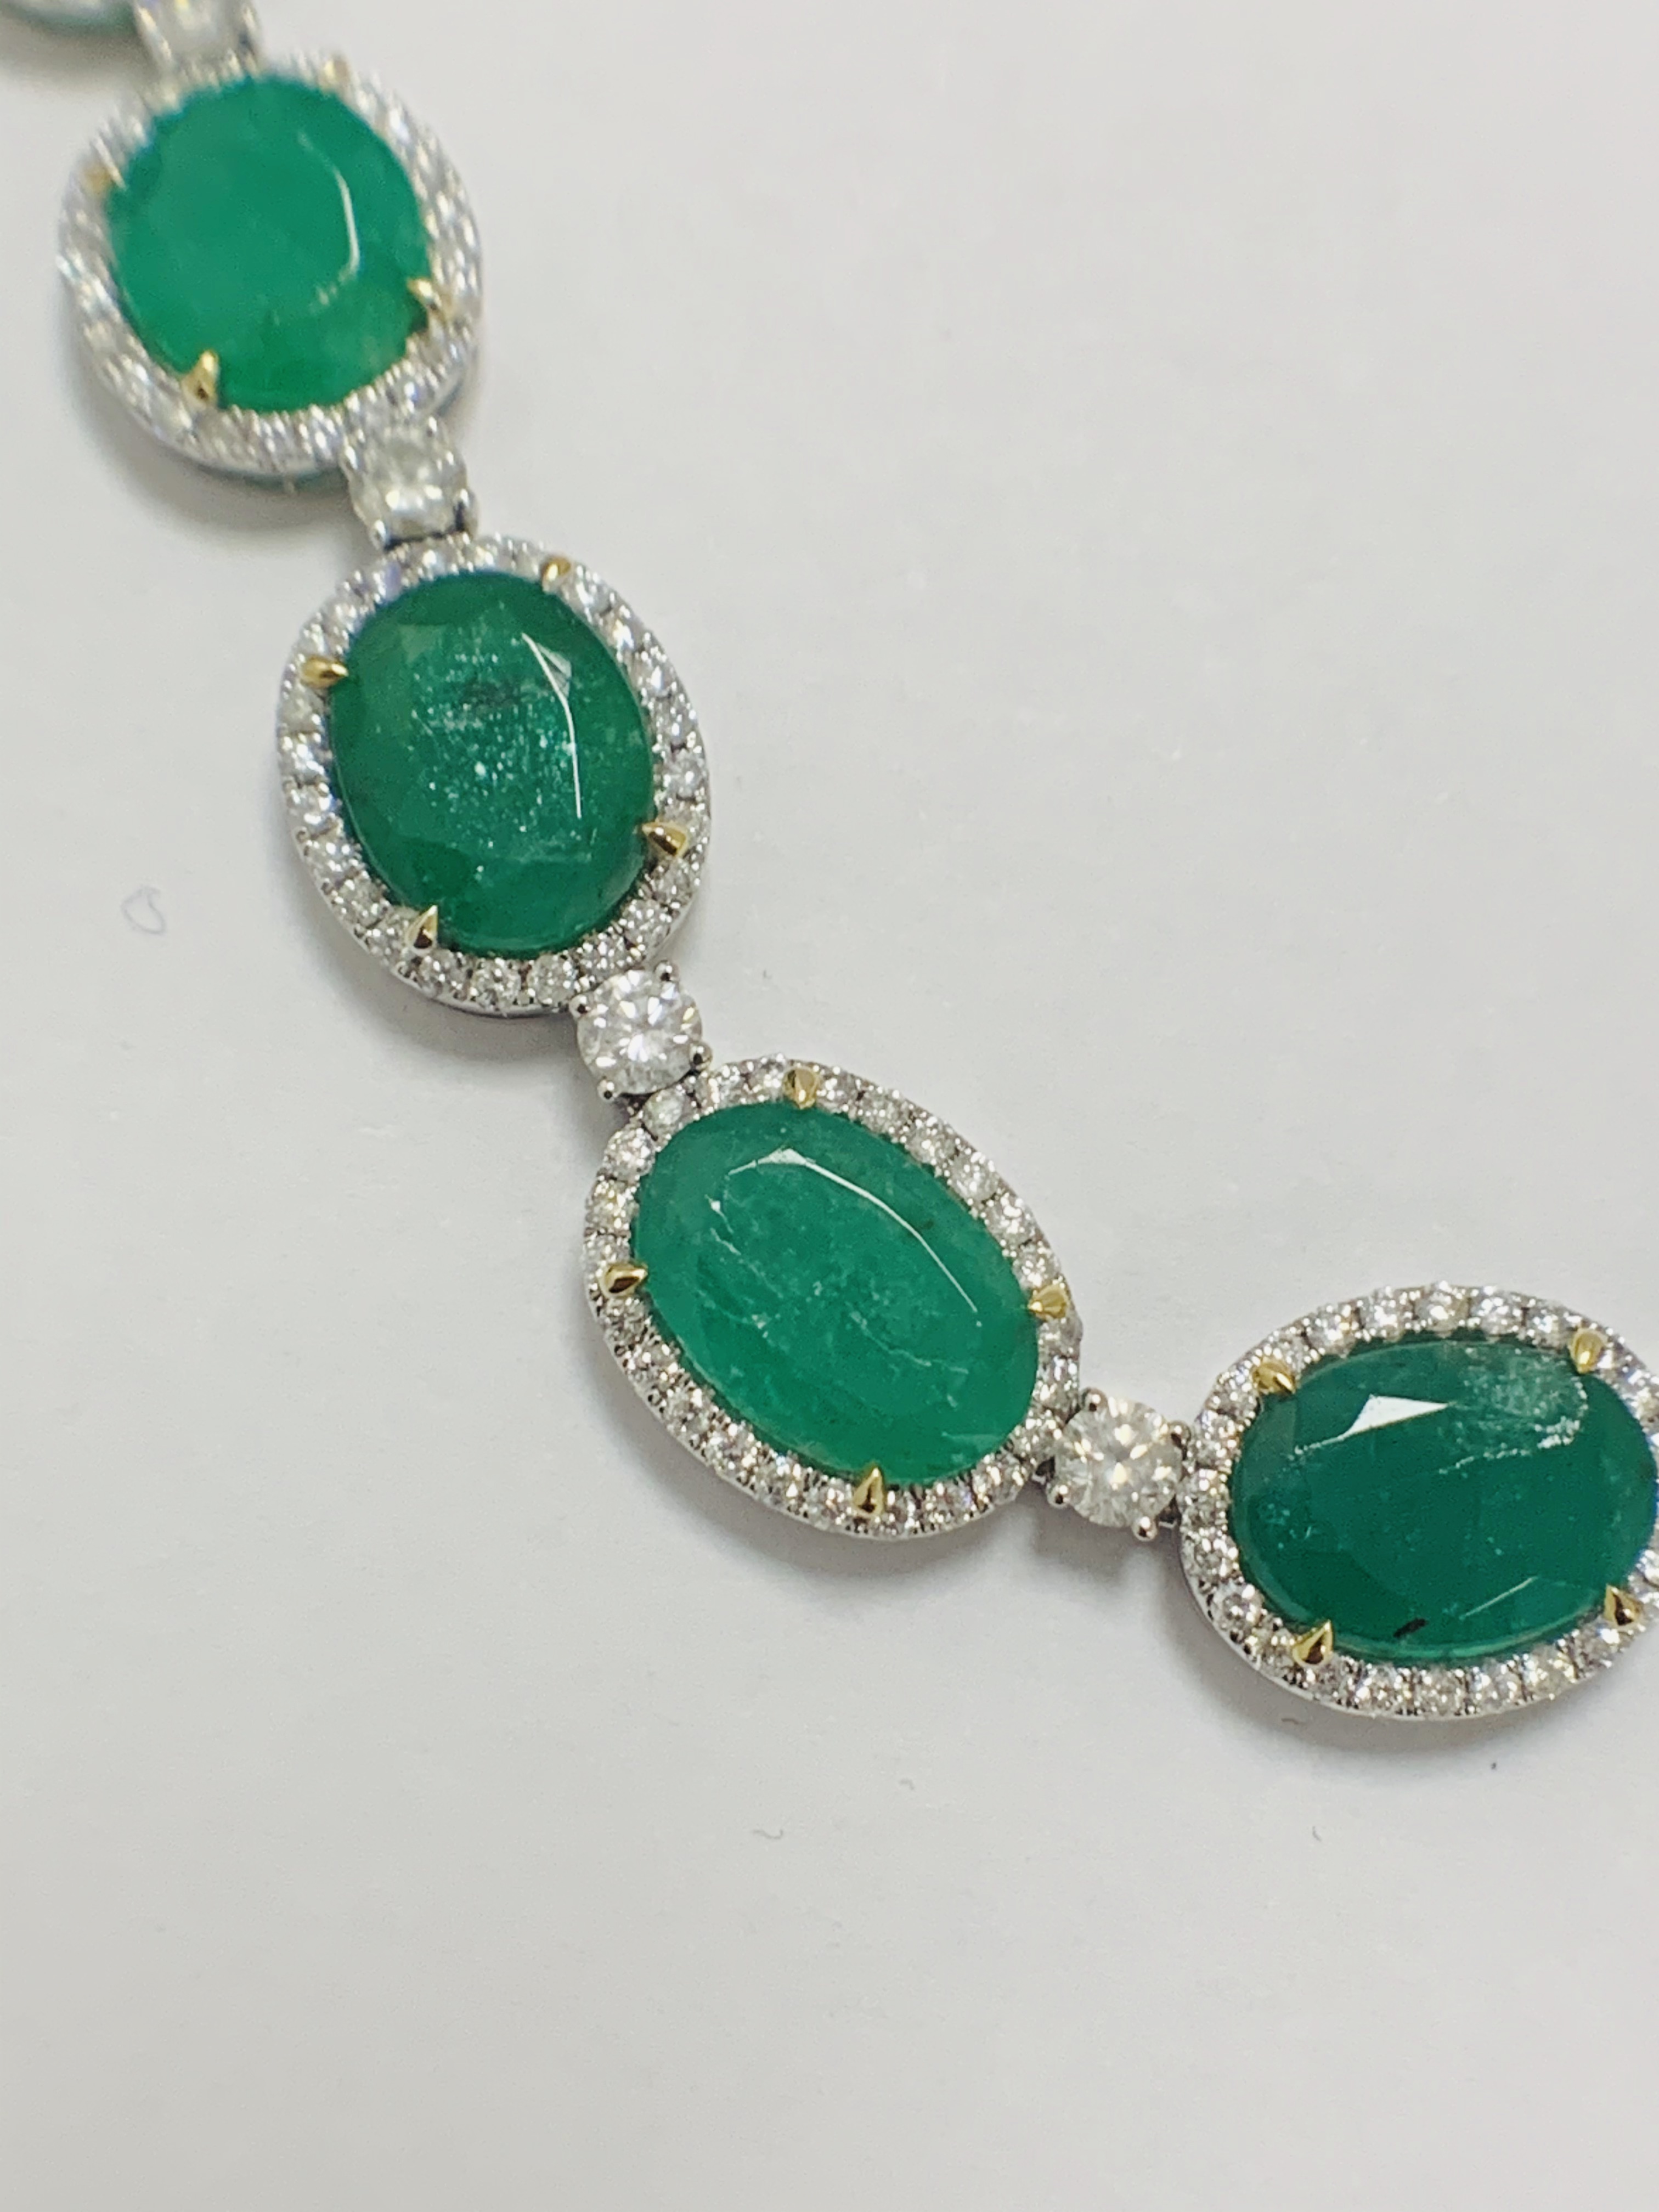 Platinum and Yellow Gold Emerald and Diamond necklace featuring, 29 oval cut, light to deep green Em - Image 21 of 36